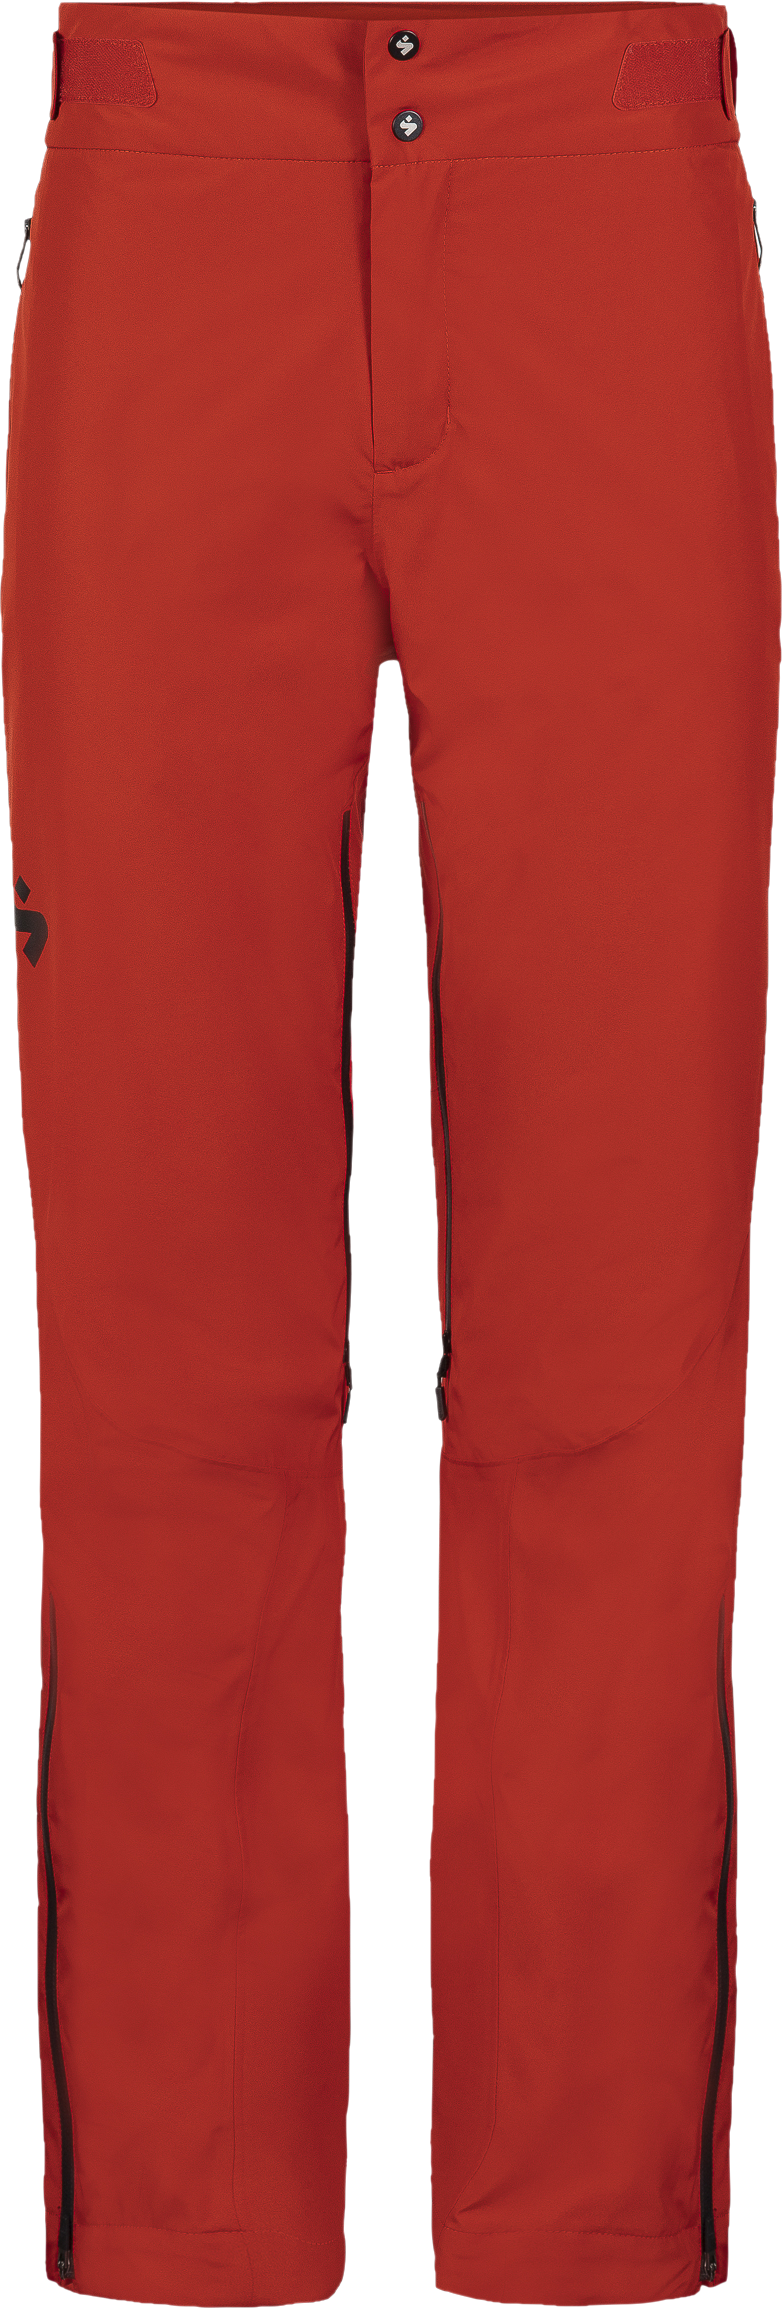 Sweet Protection Sweet Protection Men's Crusader GORE-TEX Infinium Pant Lava Red S, Lava Red